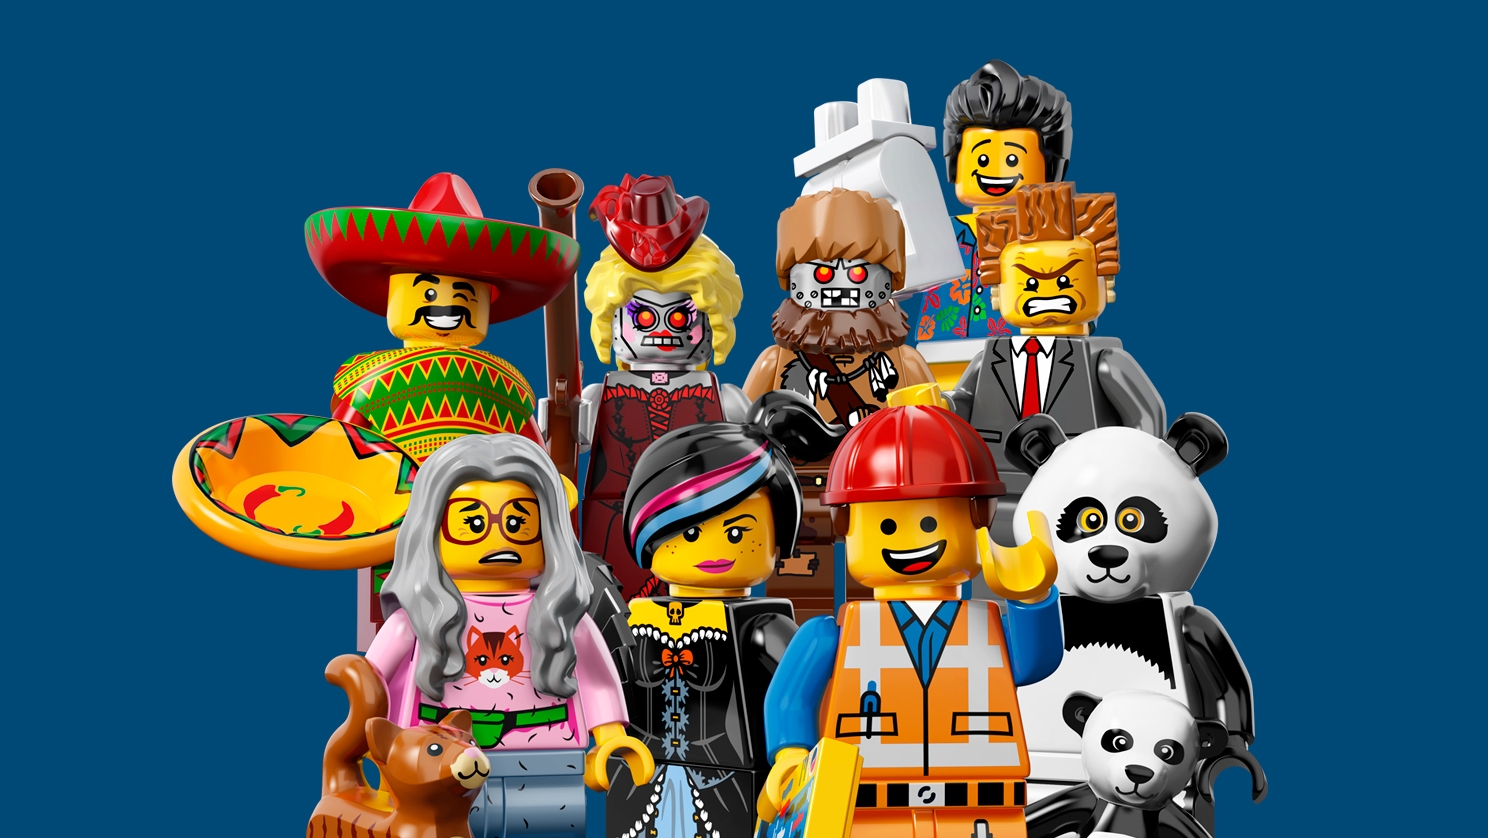 BUY 3 GET 1 FREE LEGO MINIFIGURES 71004 THE LEGO MOVIE PICK CHOOSE YOUR OWN 